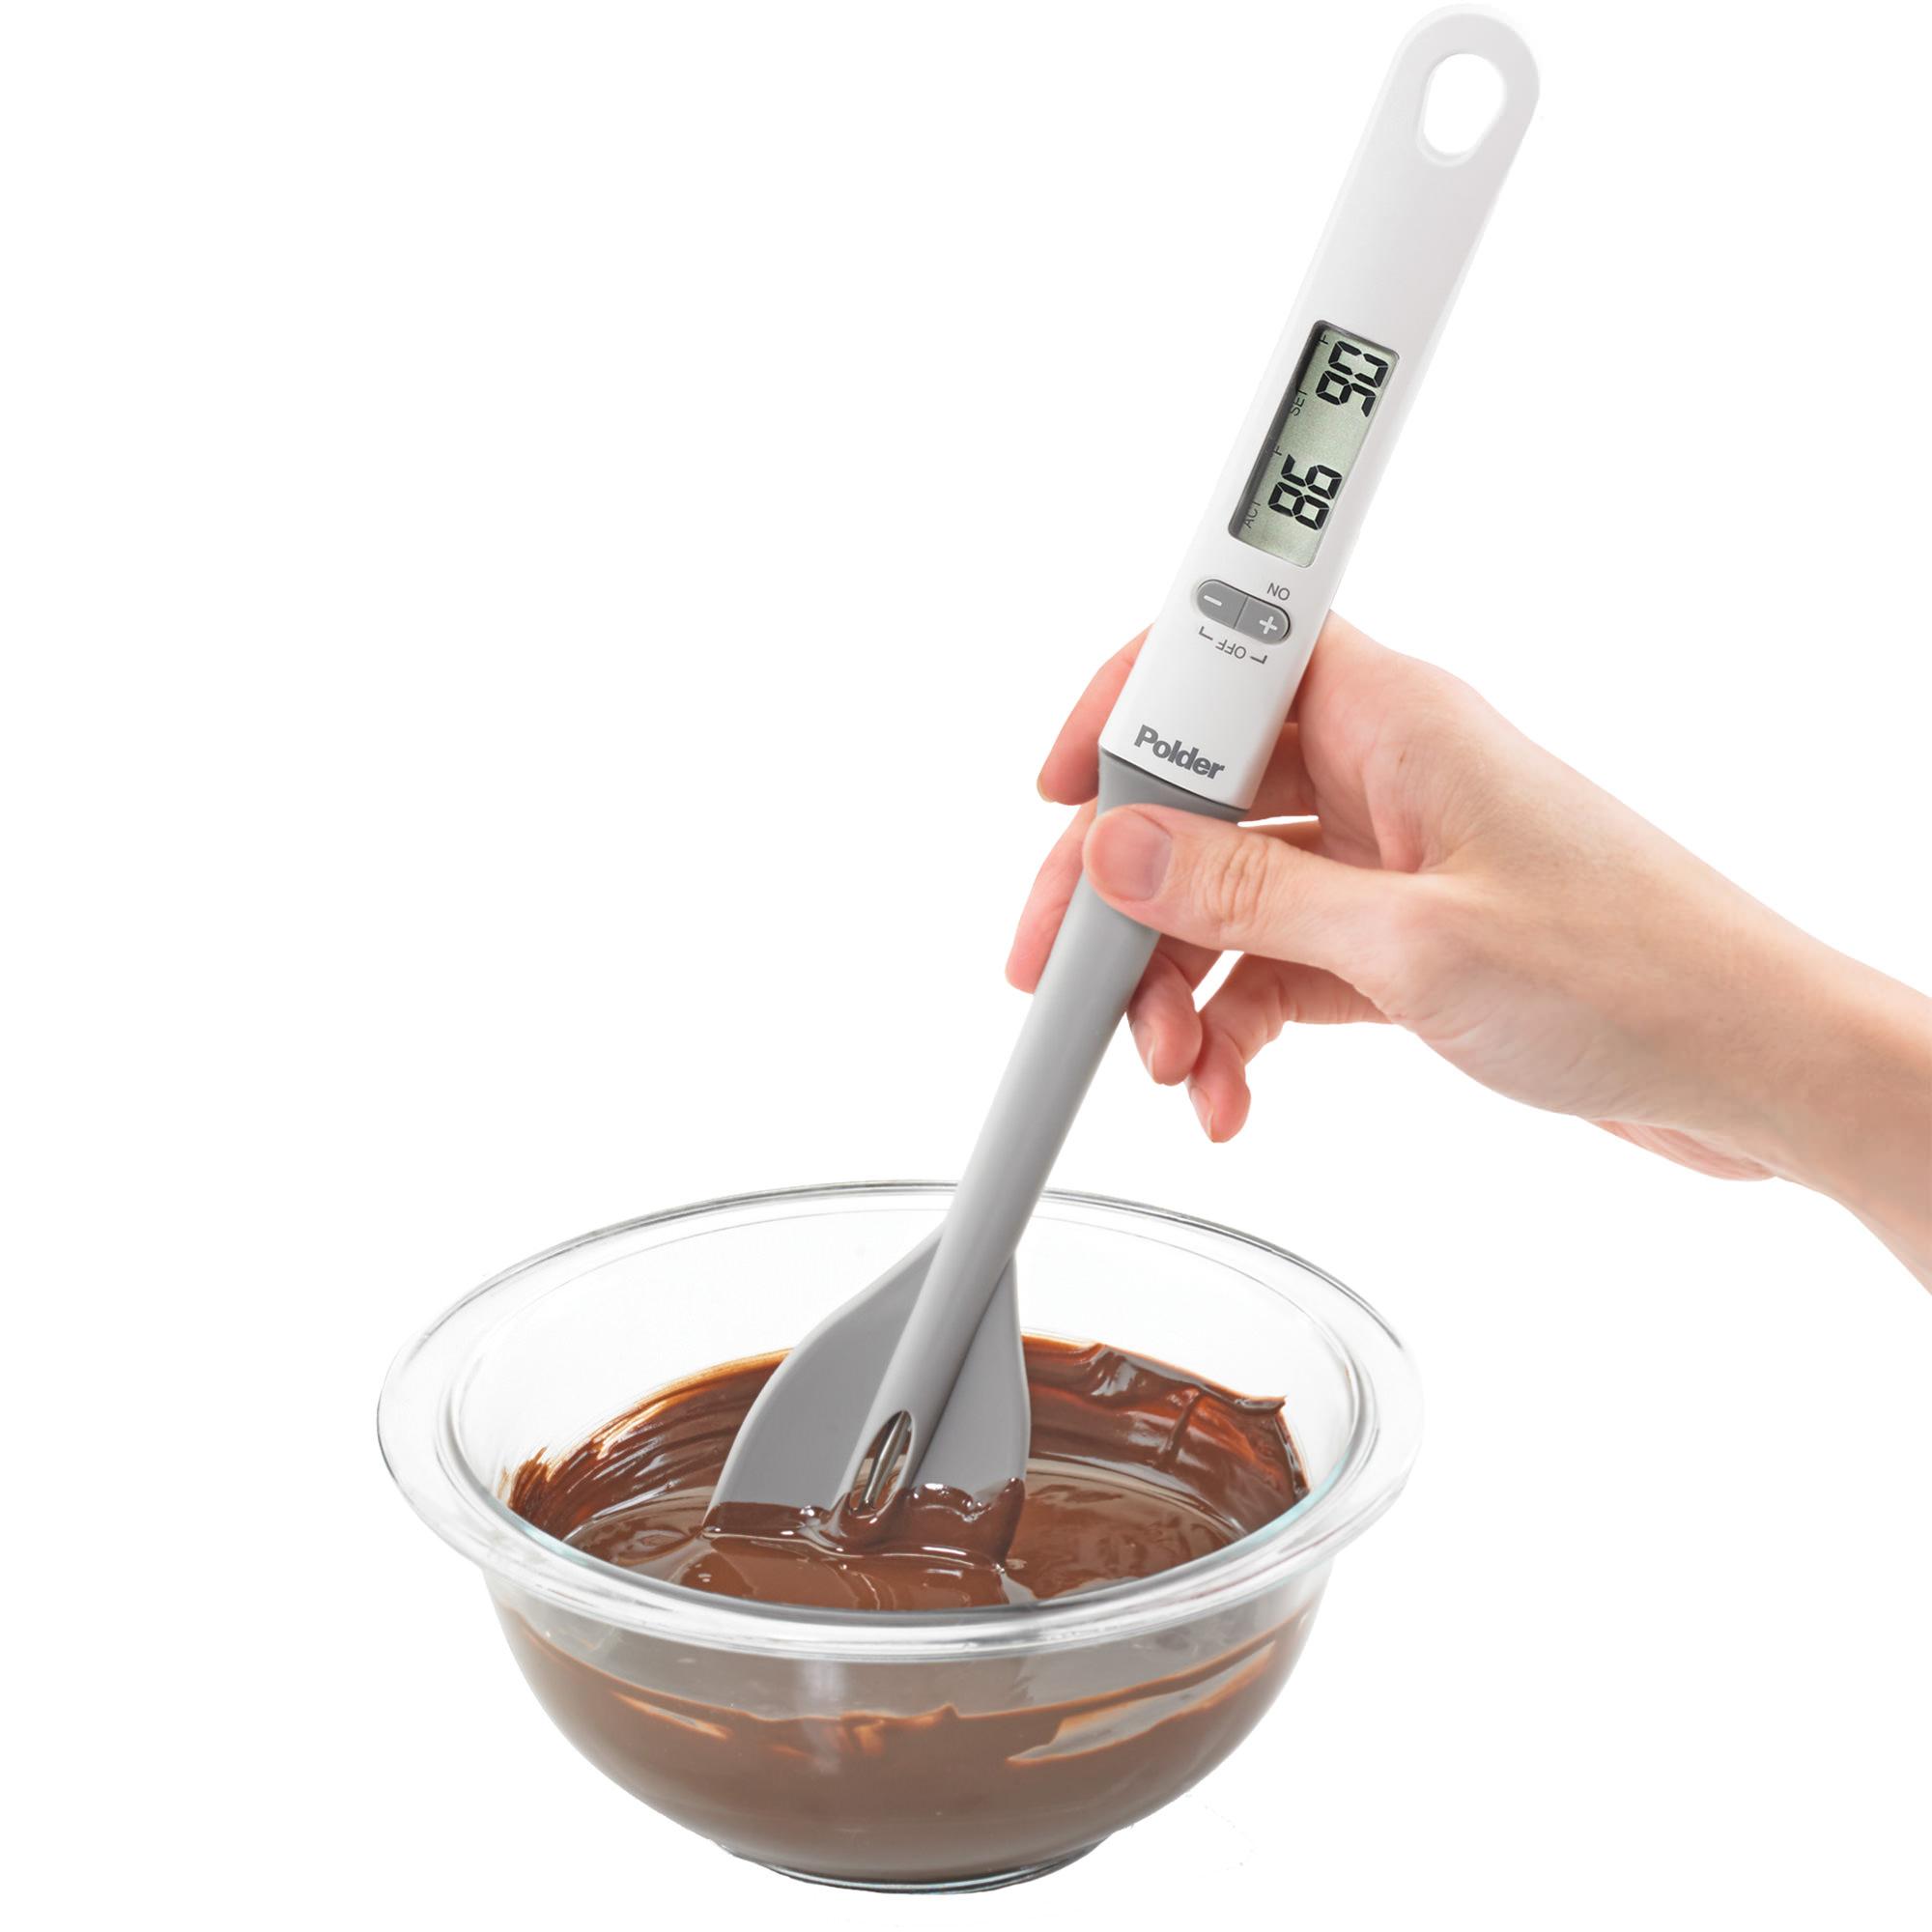 Polder Digital Baking & Candy Thermometer Image 4